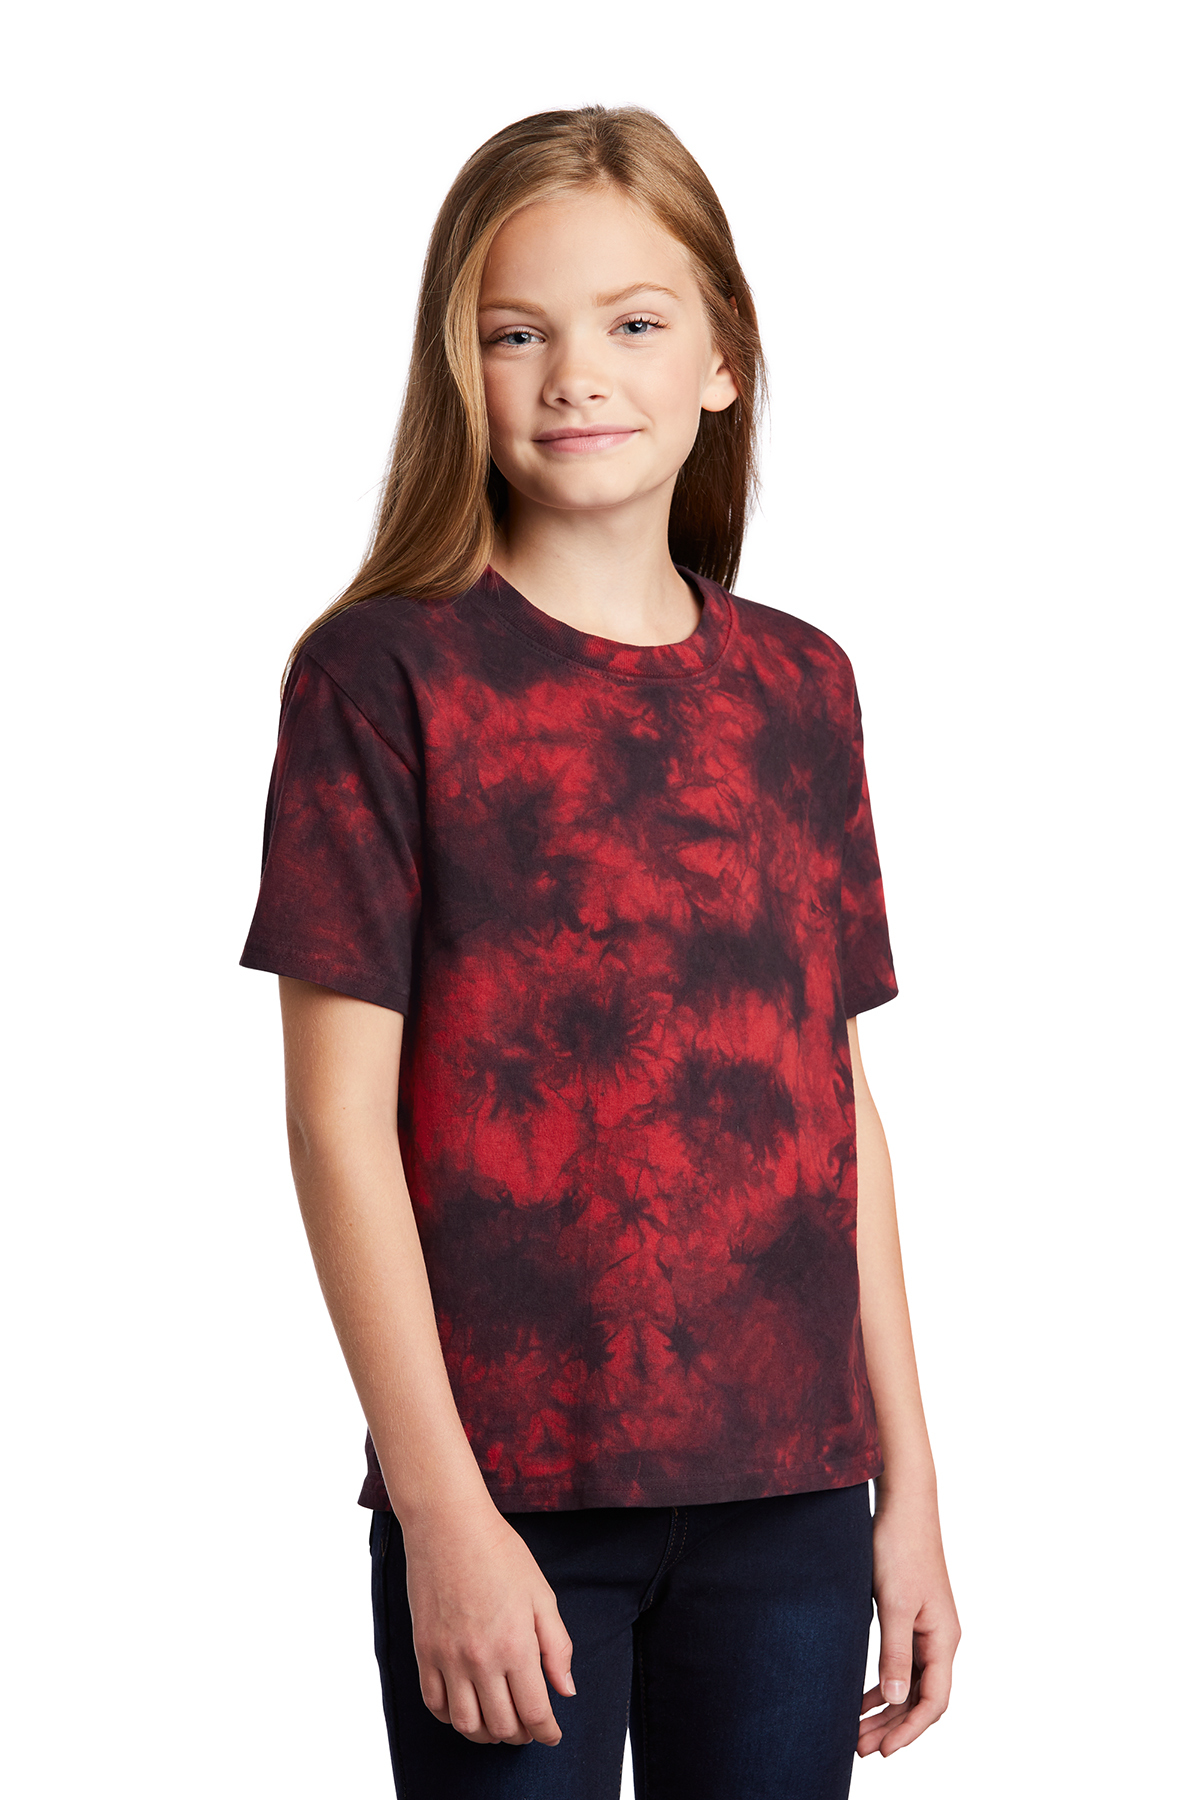 Port & Company Youth Crystal Tie-Dye Tee | Product | Company Casuals